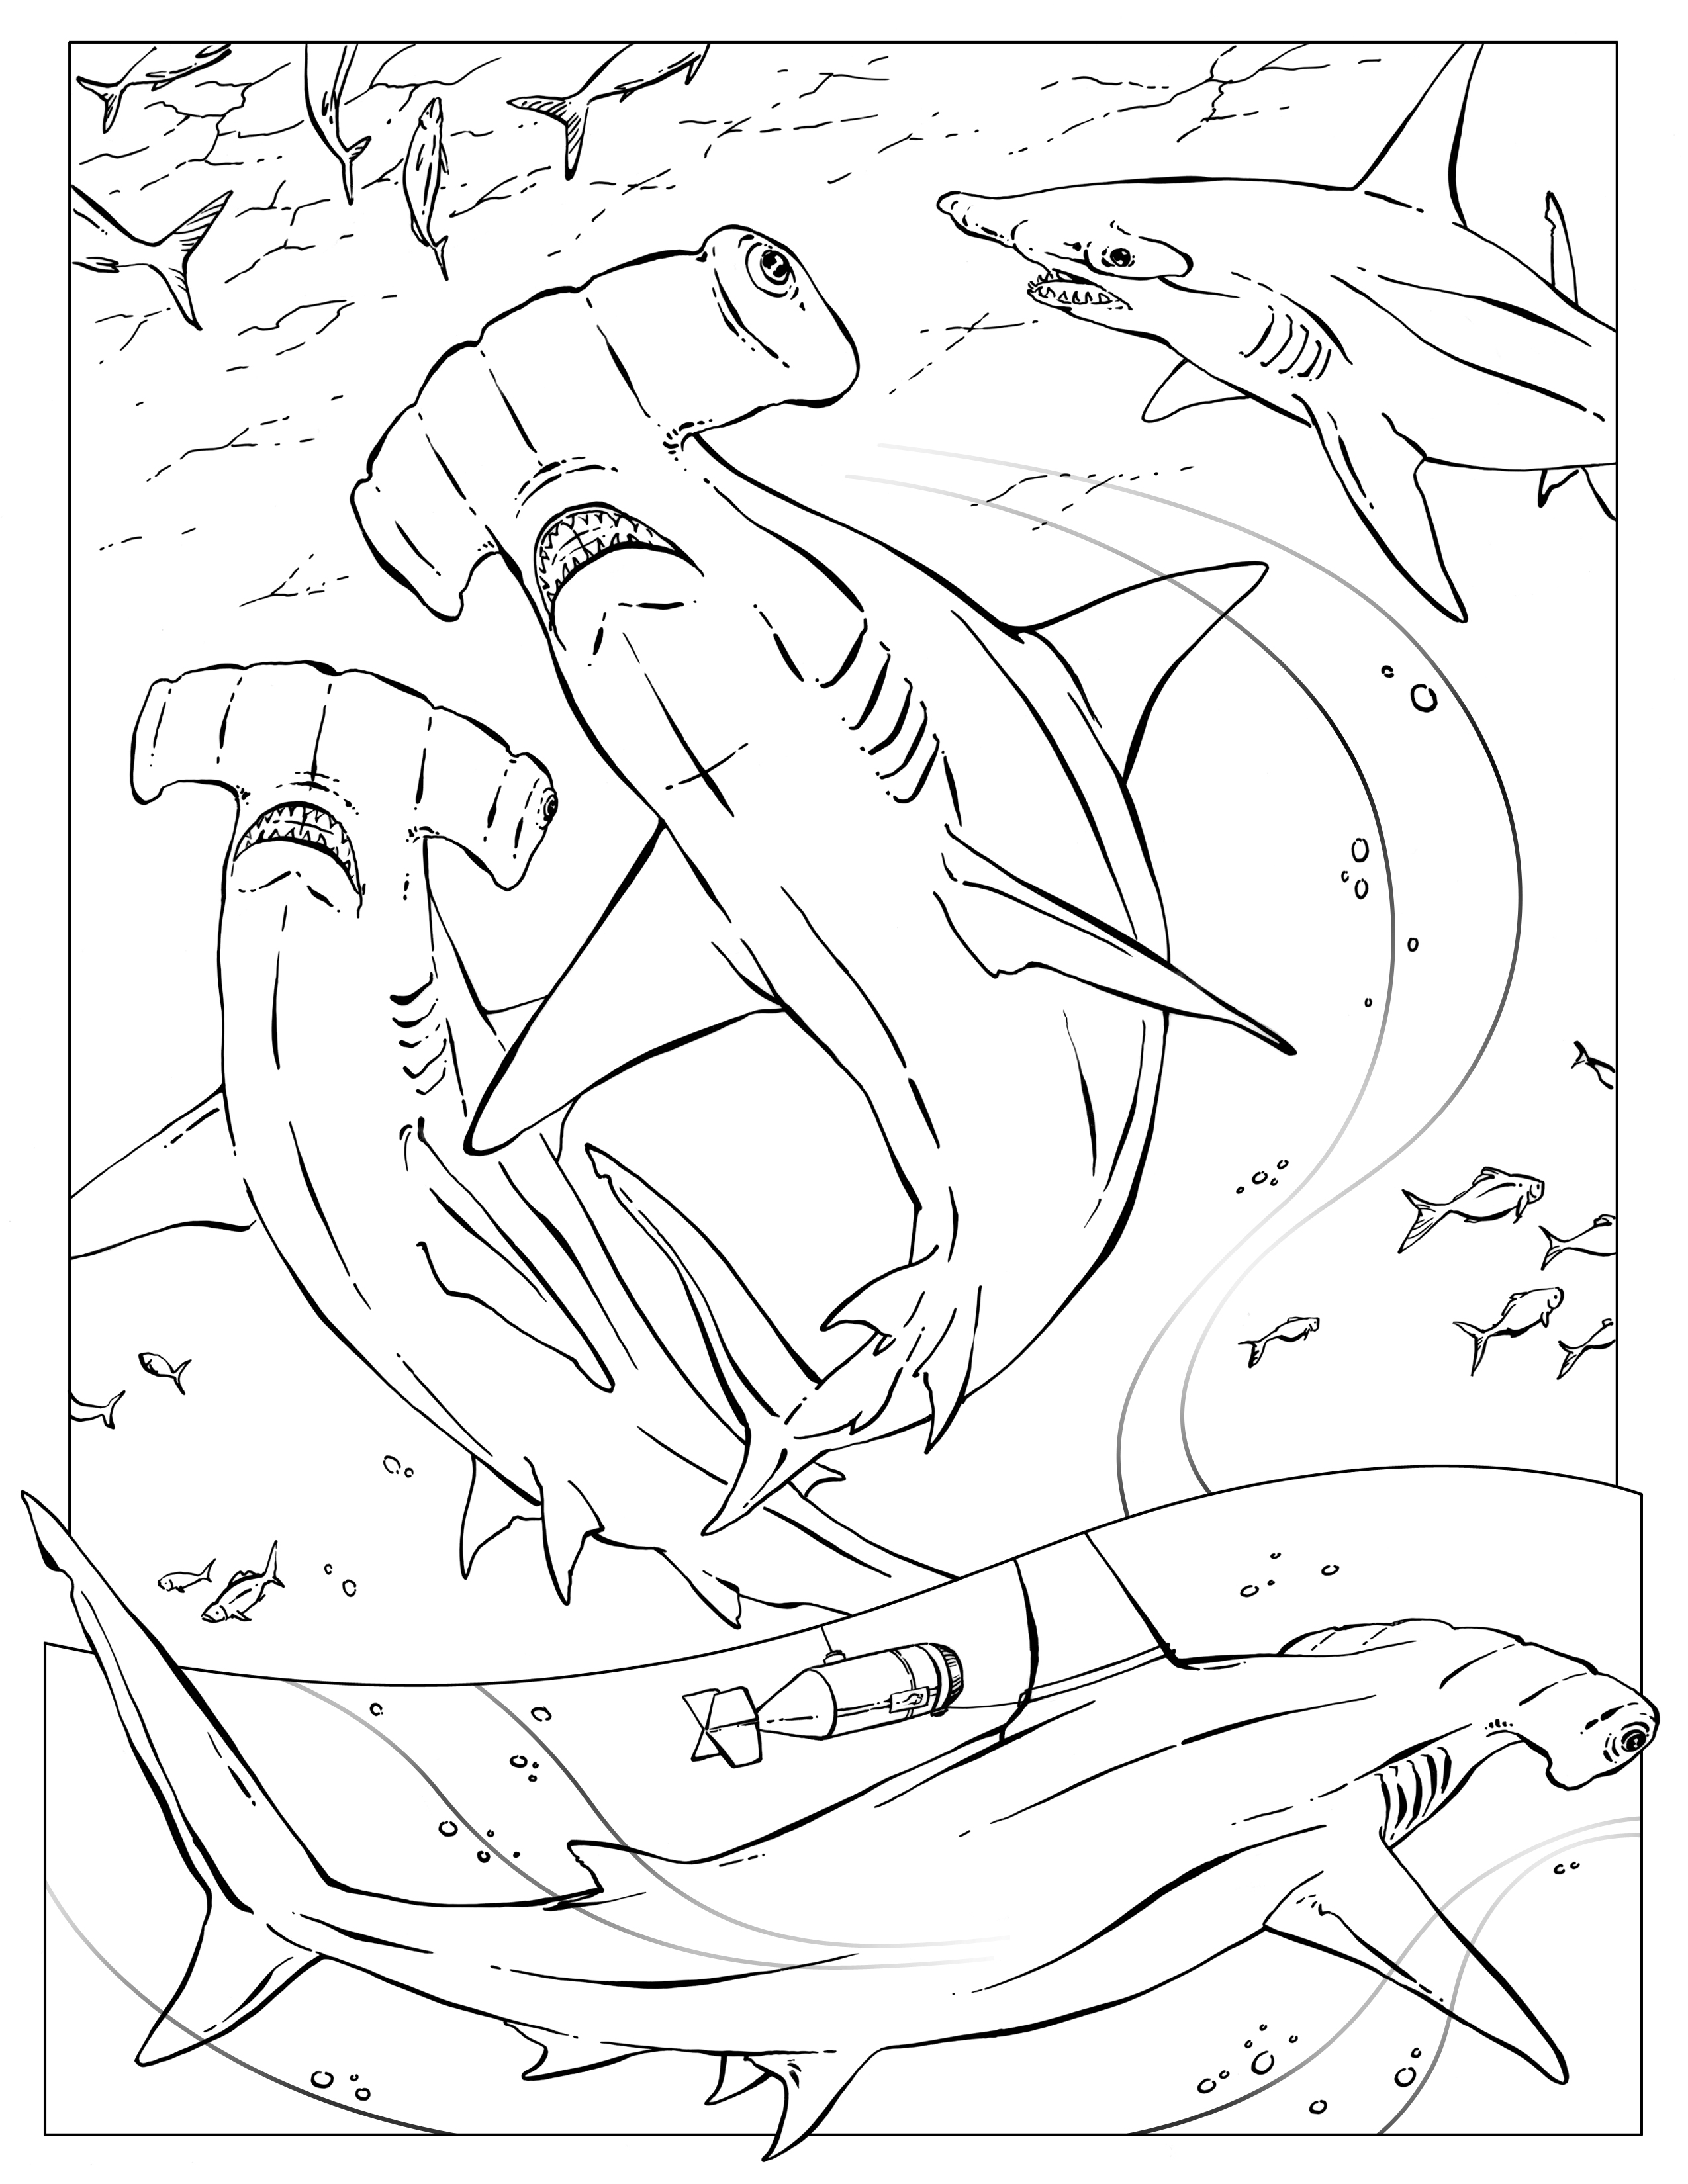 Hammerhead Shark Coloring Pages 6